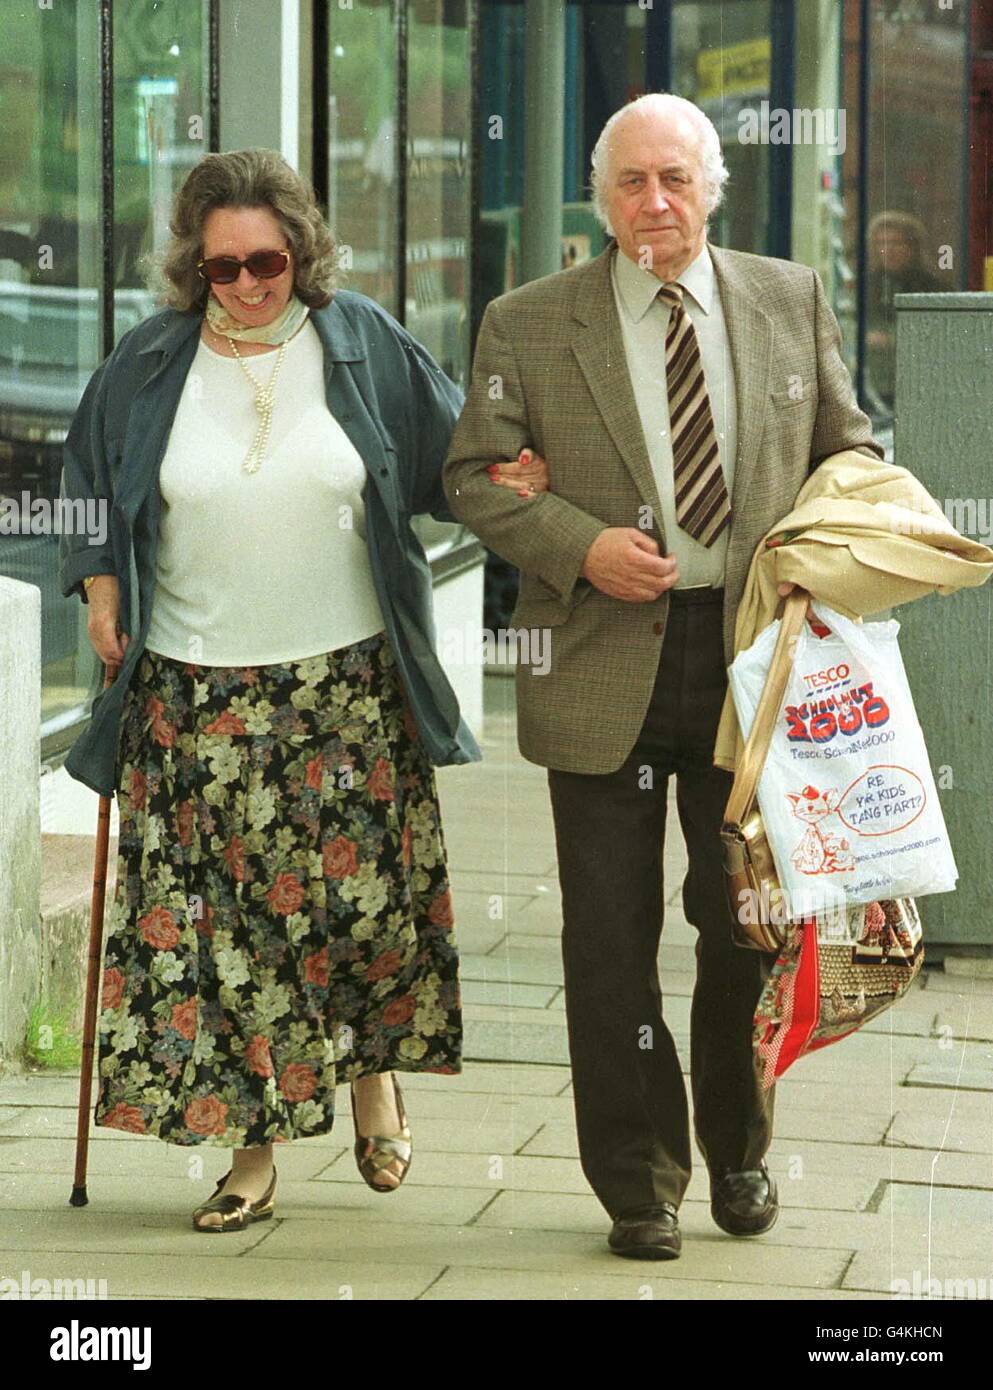 Valerie and Derek Tully arrive at Lewes Crown Court in East Sussex. Mr Tully is accussed of battering Valerie, his wife of 46 years, repeatedly with a pole while she lay in bed before setting fire to his bungalow to hide the evidence. 14/5/99: Found guilty. * Valeries left with amnesia. Is standing by husband. Charge is attempted murder. Stock Photo